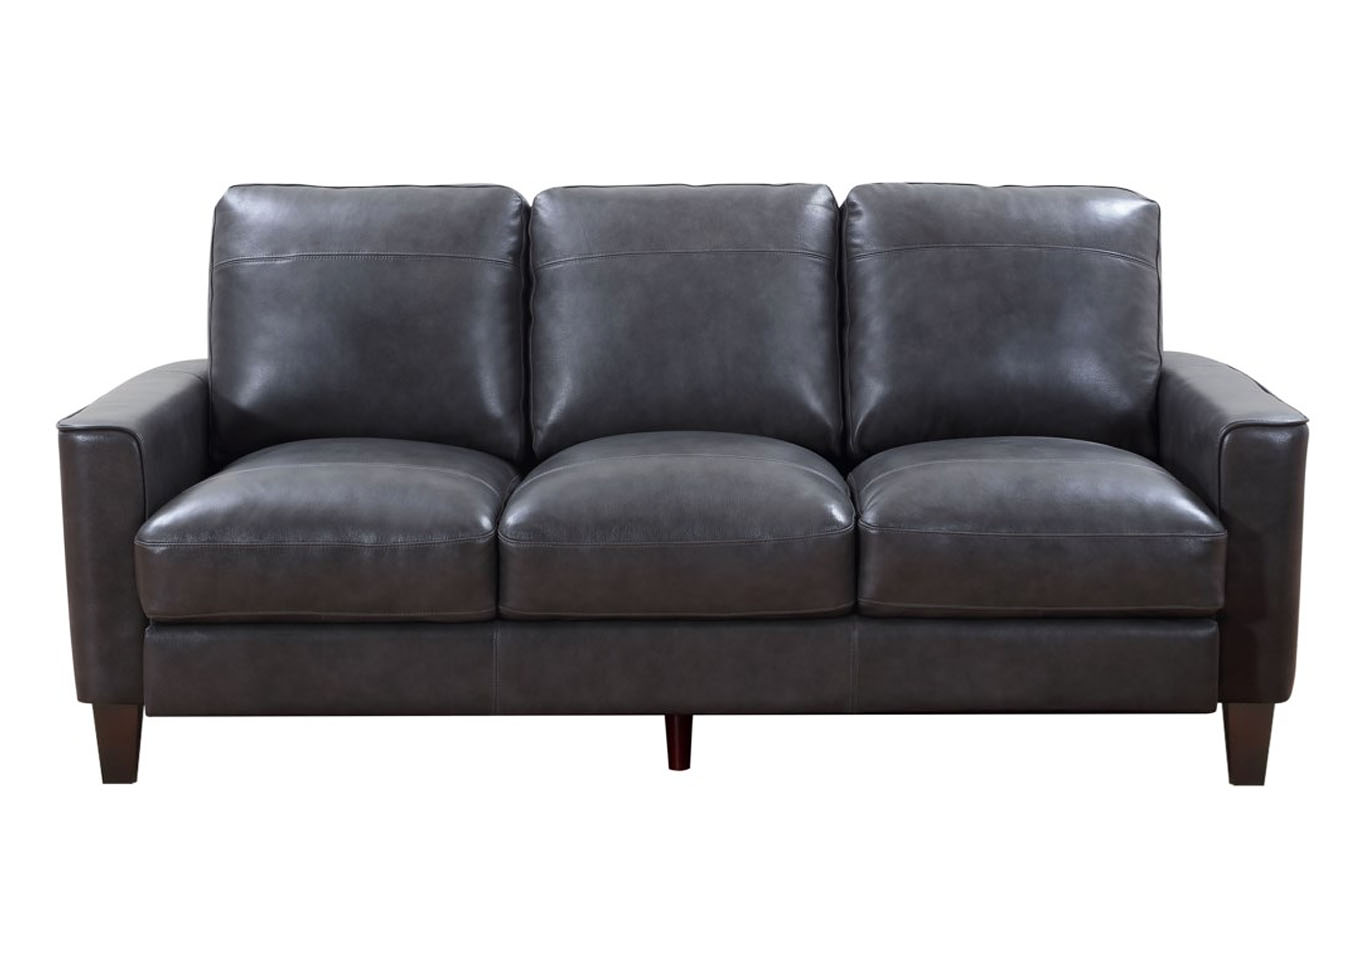 Chino Top Grain Leather Sofa and Love Seat - Gray,Instore